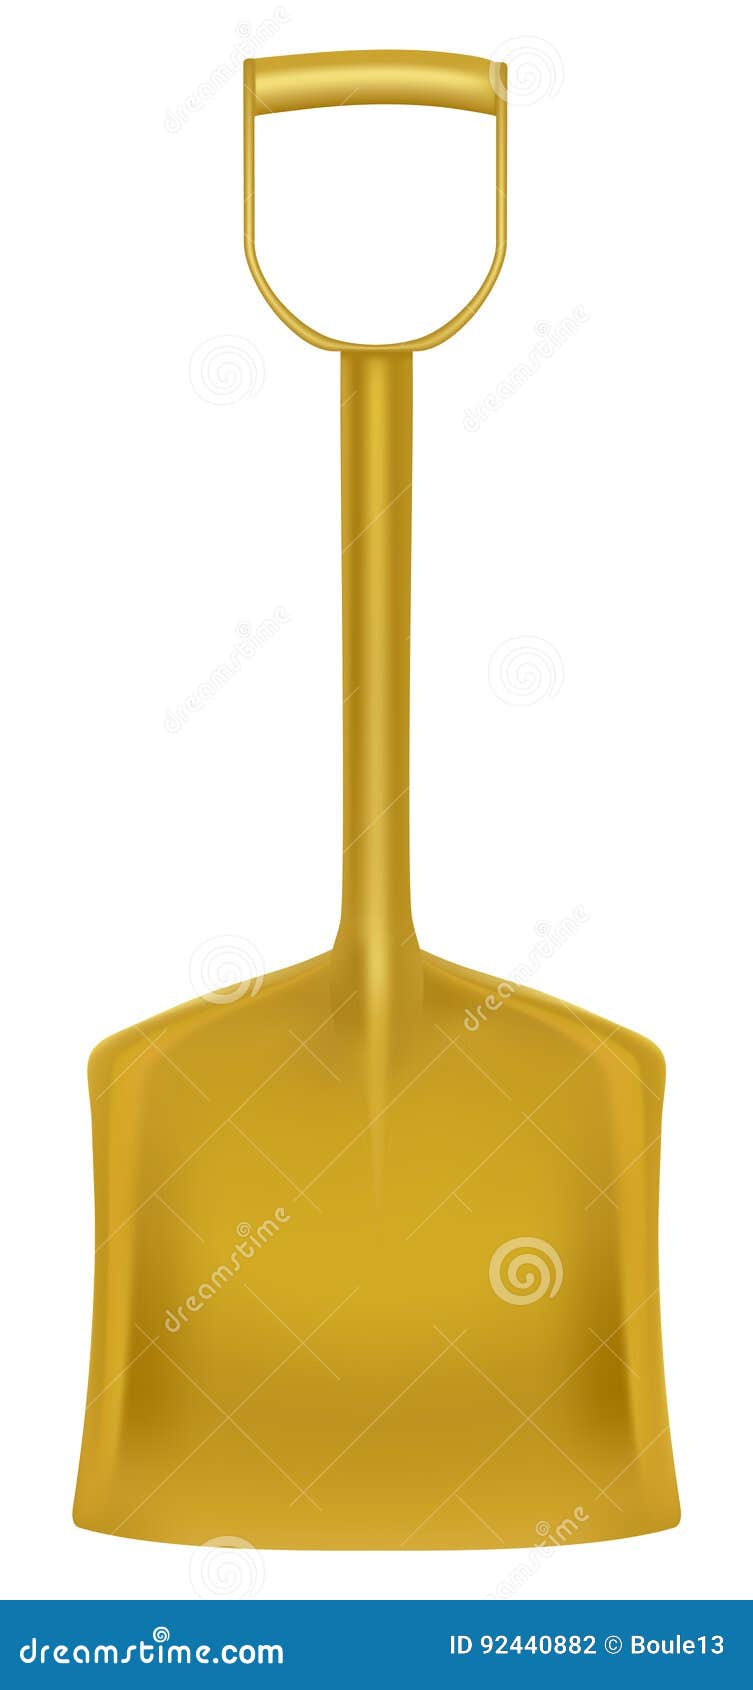 Download Snow Shovel Or Scoop Isolated On White Background Stock ...